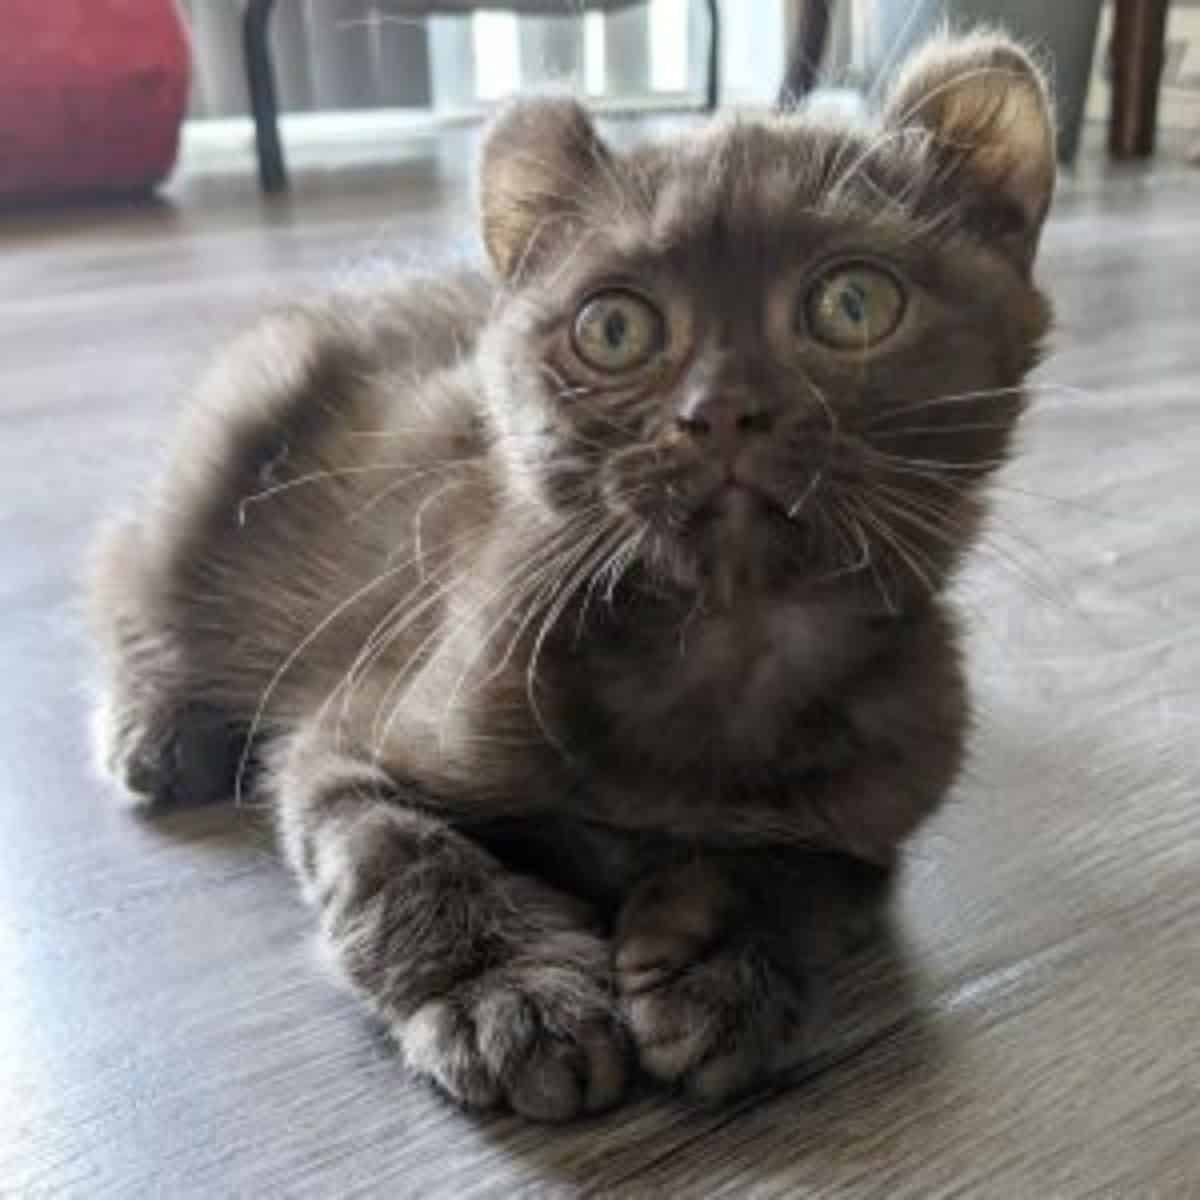 quill the kitten with teddy bear ears